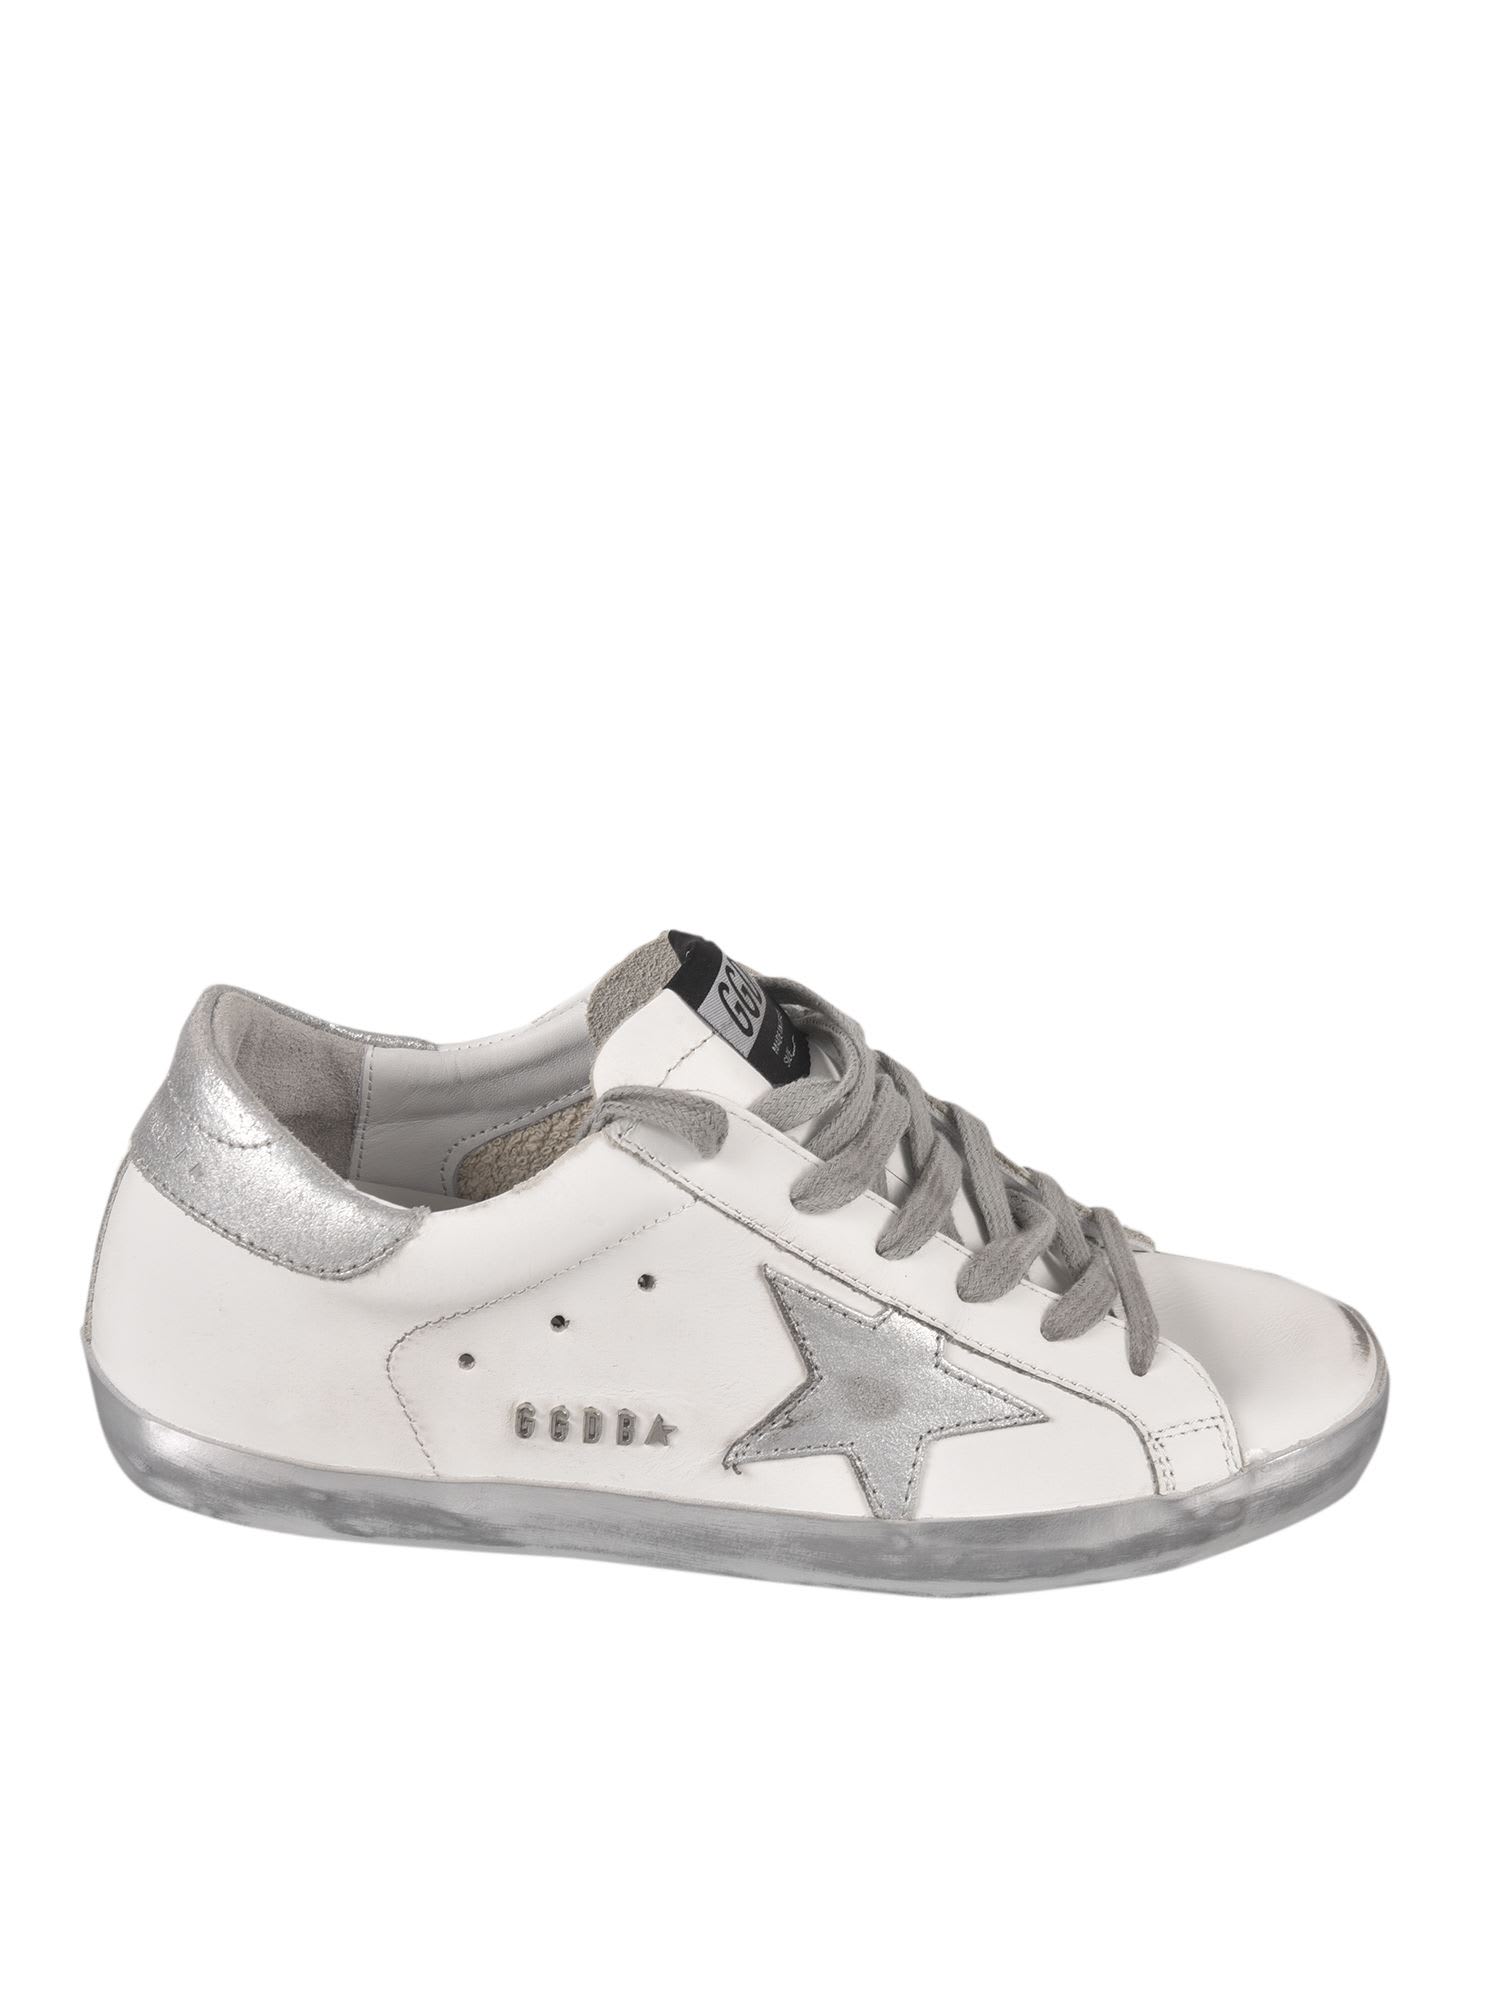 Golden Goose Trainers Superstar In White